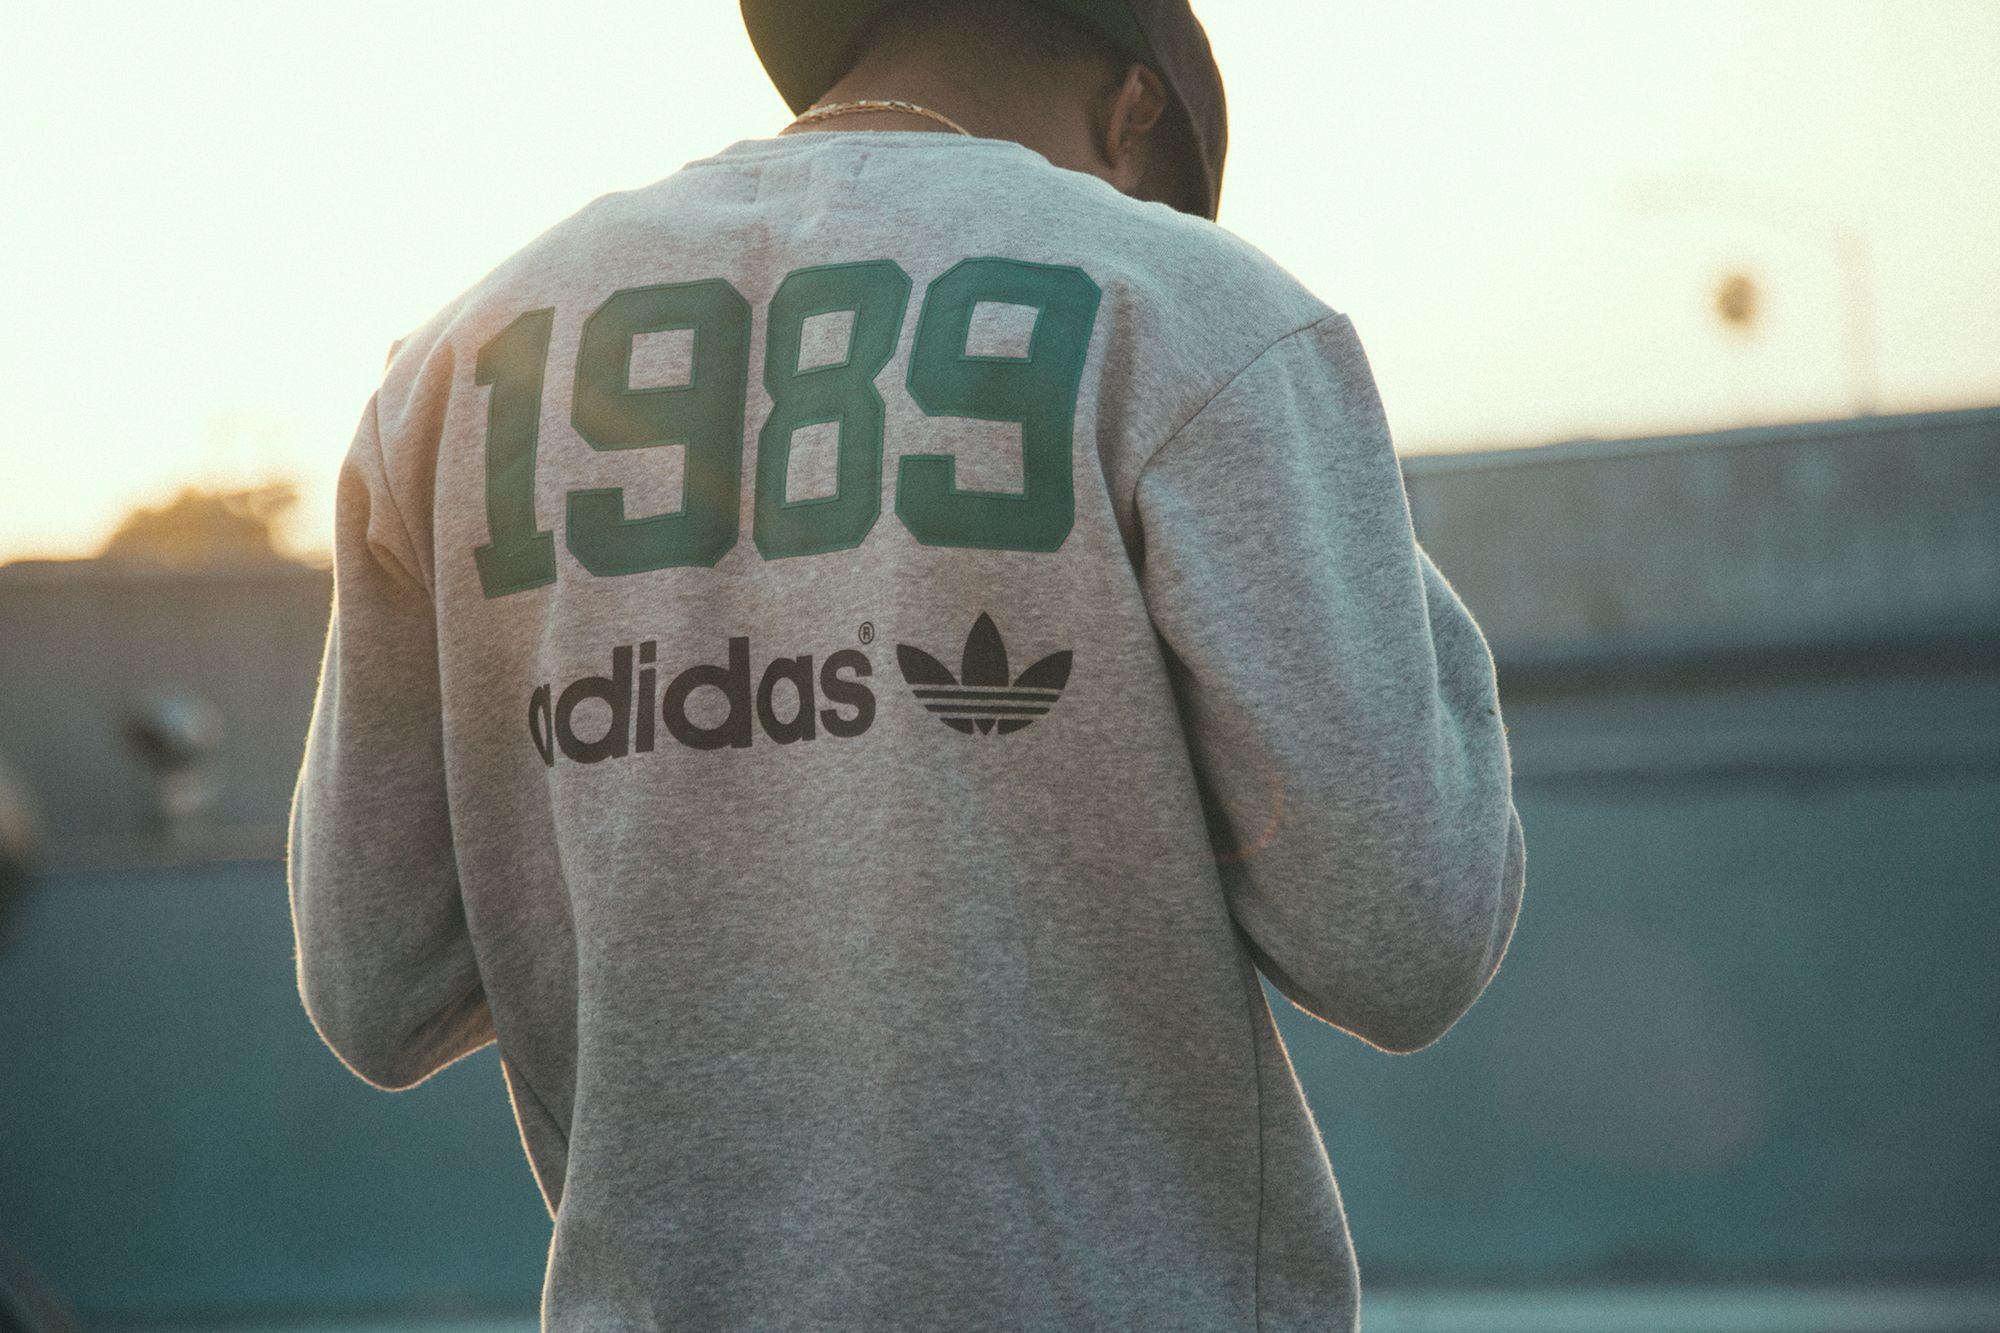 adidas originals: Songs From Scratch Truly Creative